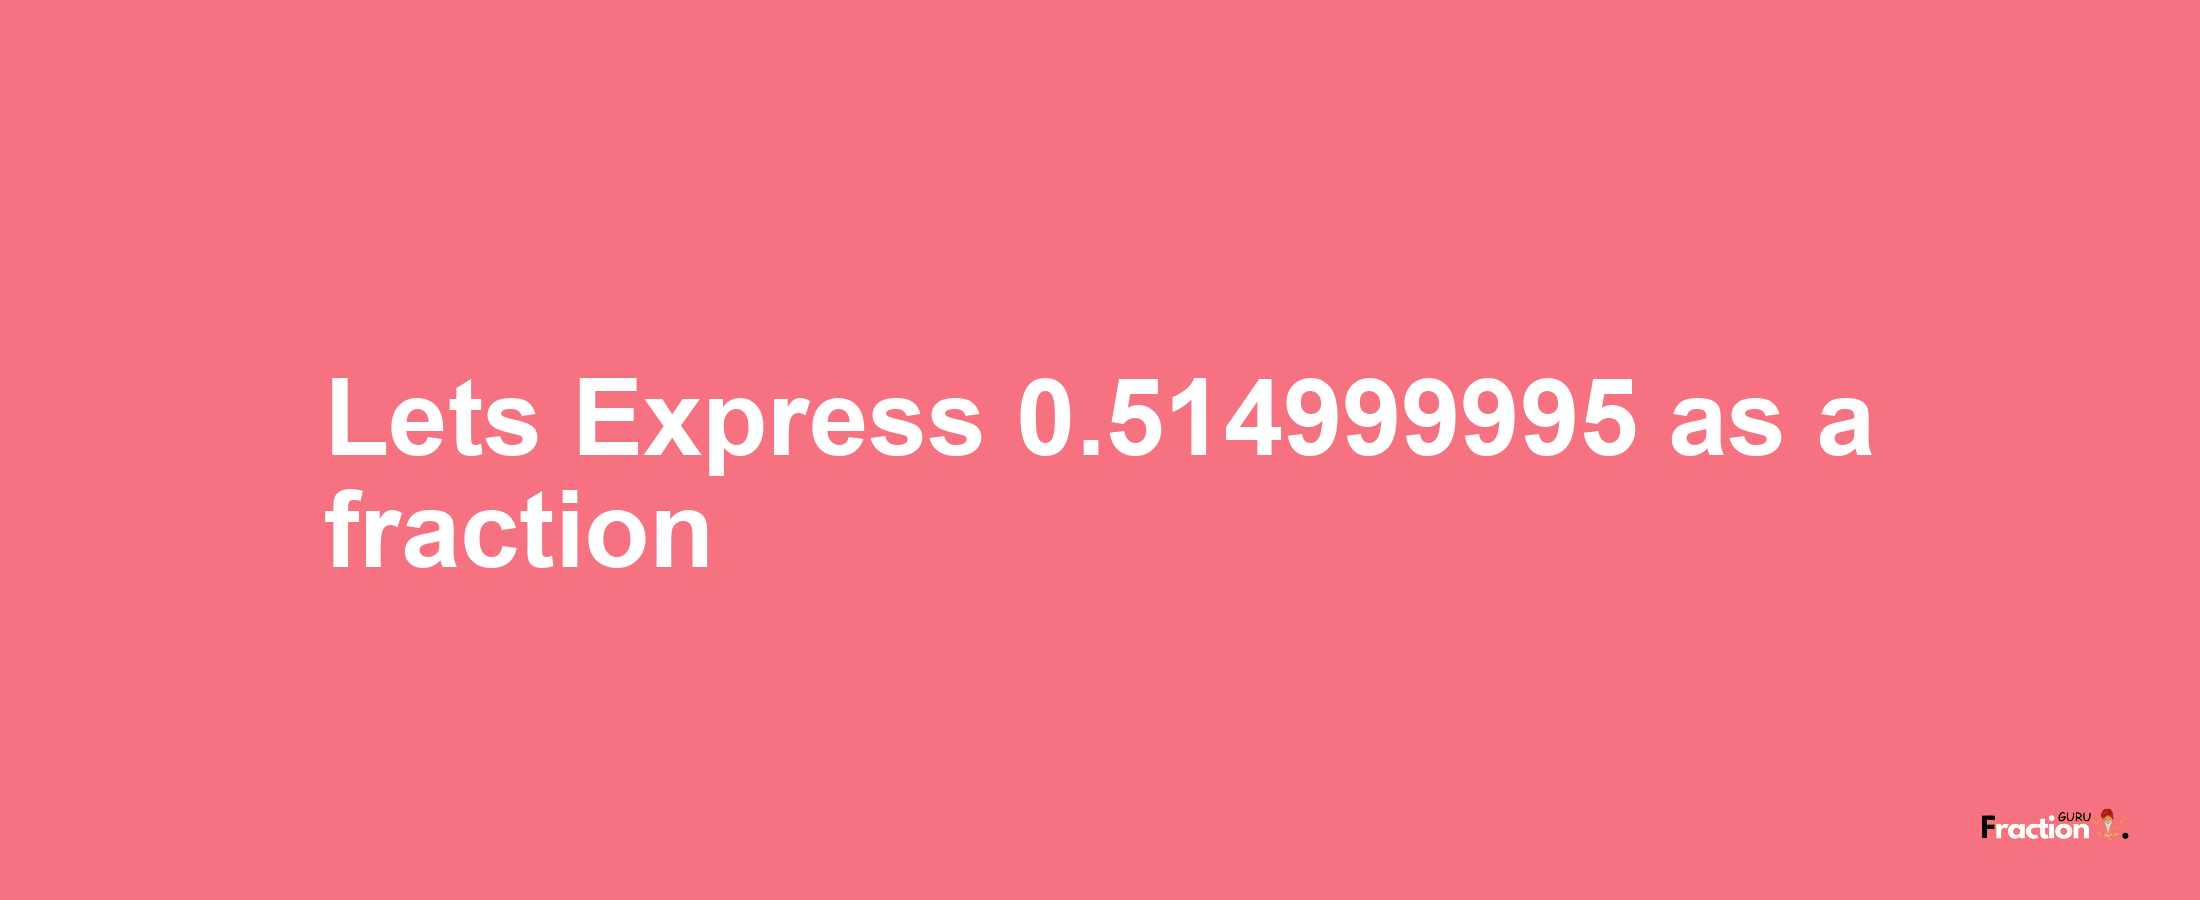 Lets Express 0.514999995 as afraction